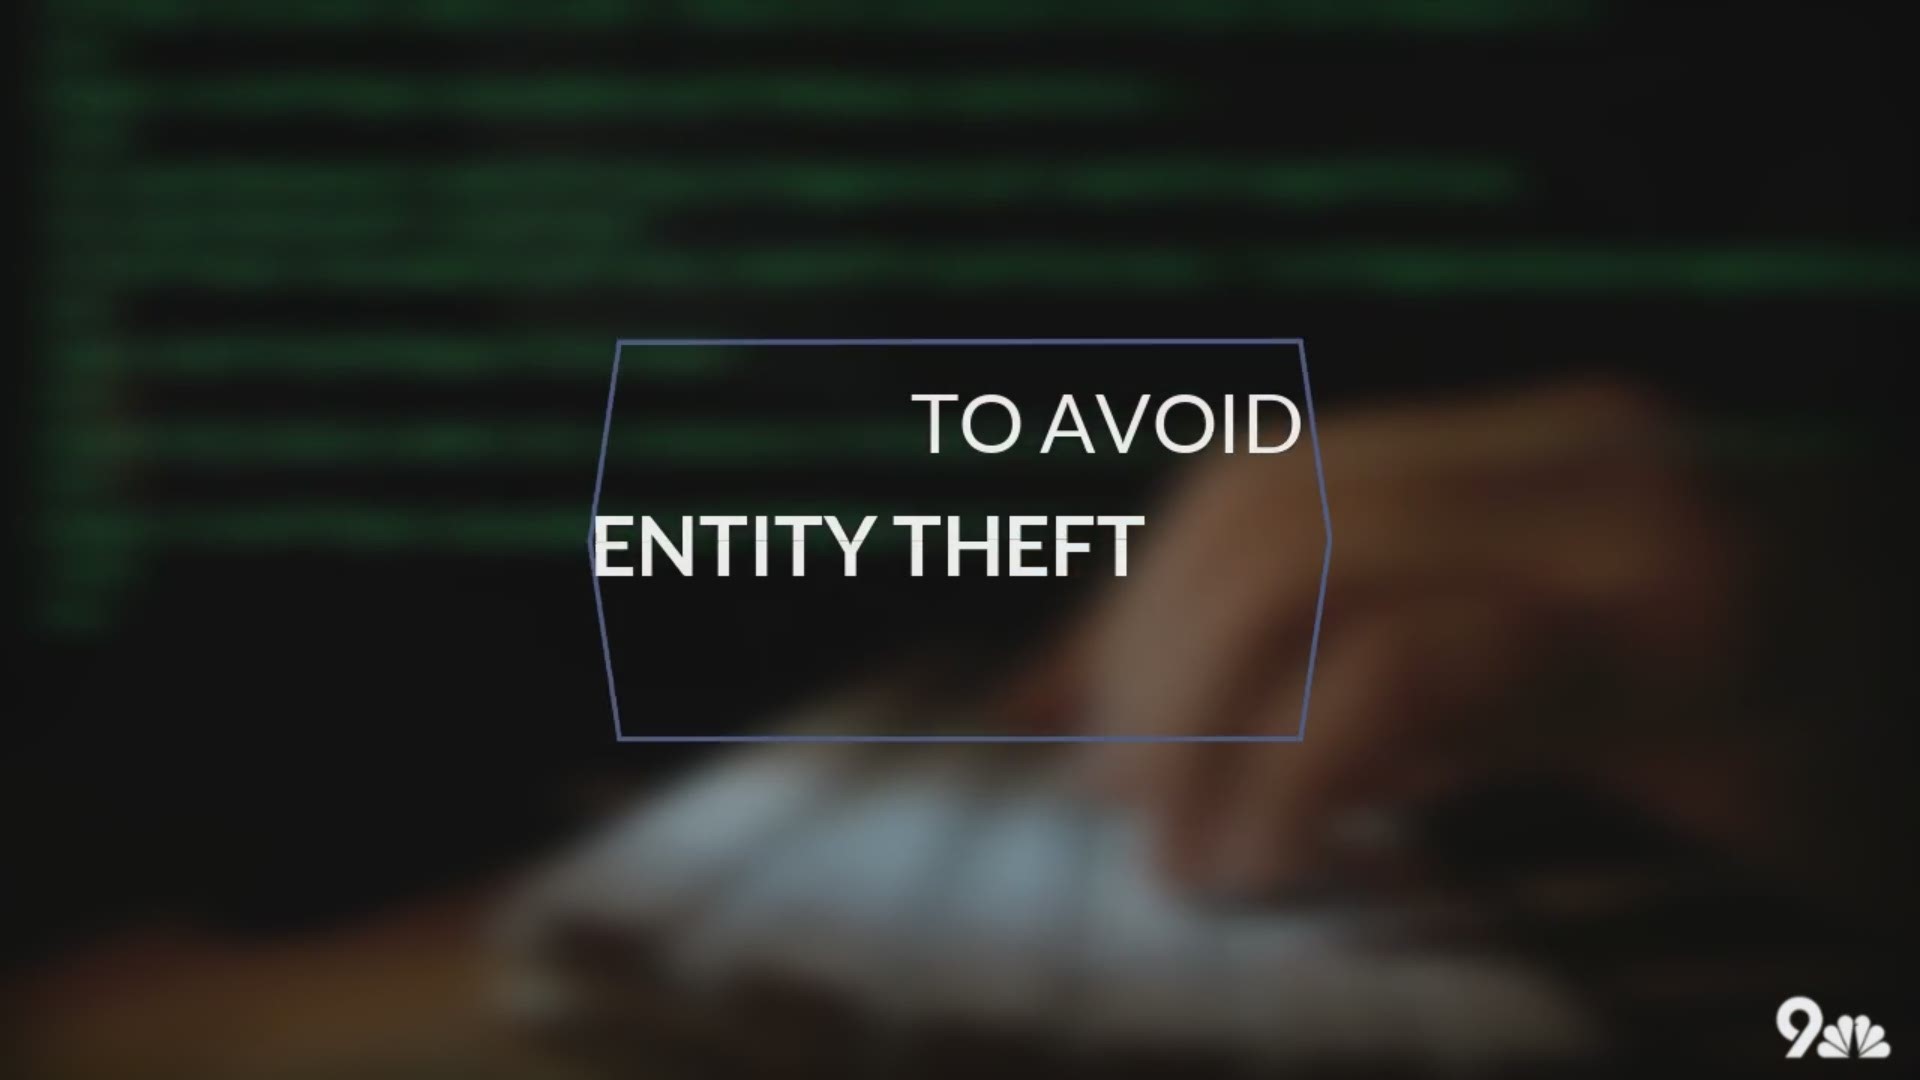 It's sad, but true: There are criminals looking to use your name and get your money. But there are ways to help make sure you don't become a victim.